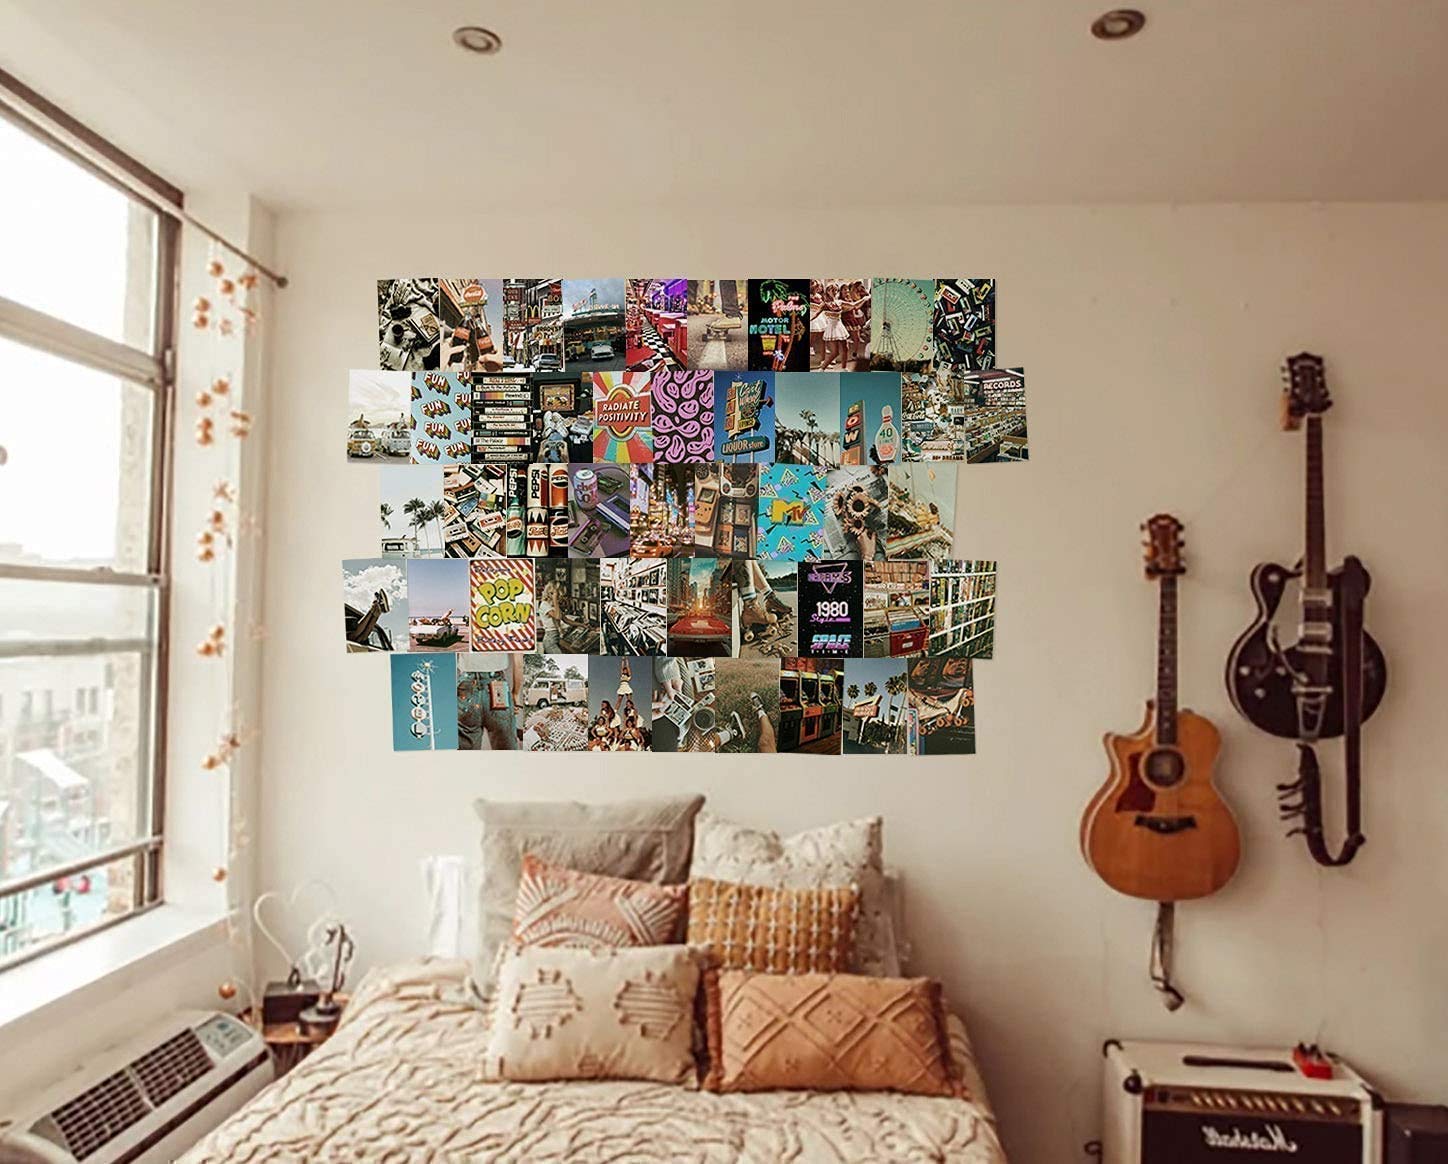 Relive the 80s with these cool 80s room decorations ideas